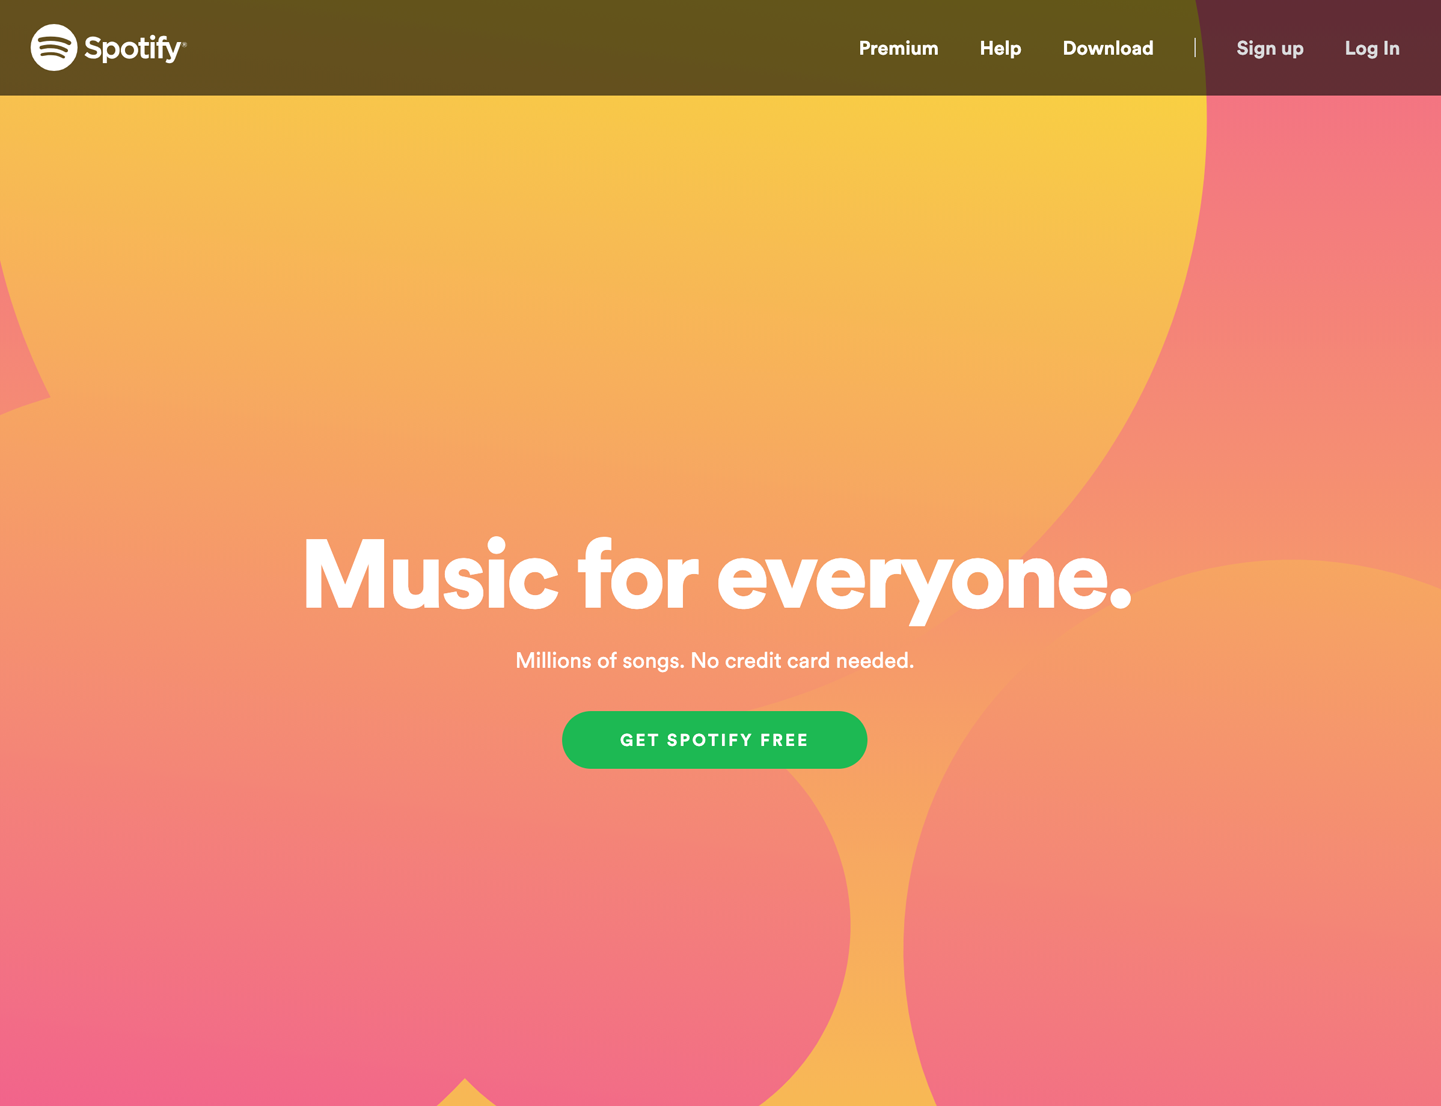 The Spotify landing page—a very clear single door